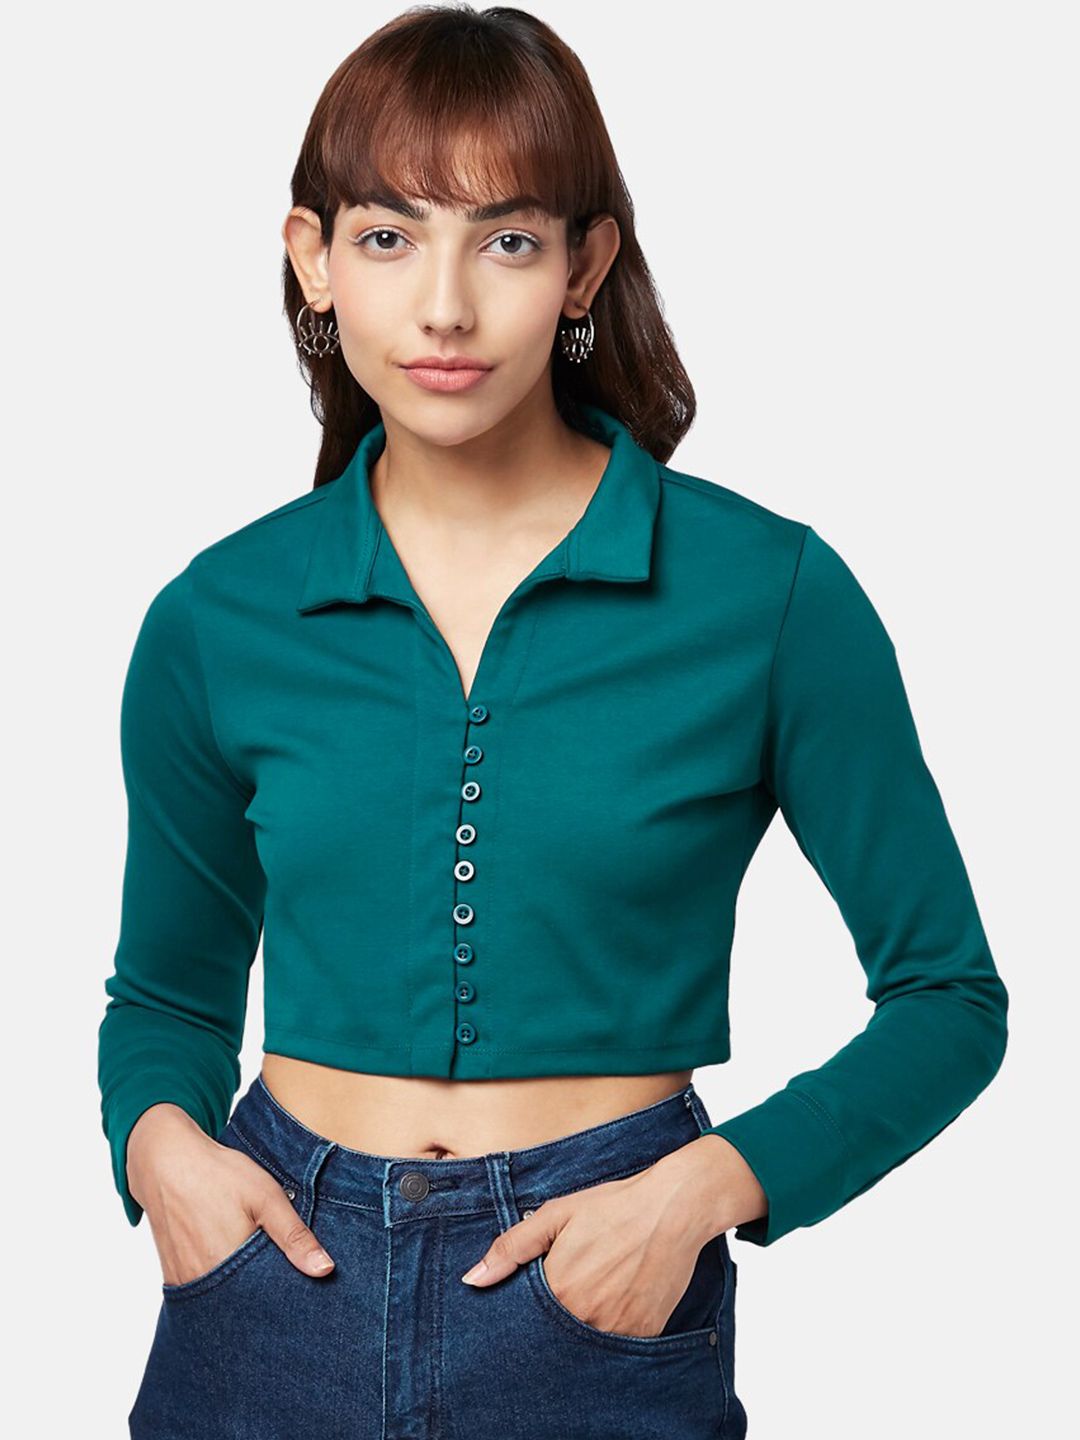 People Green Shirt Style Crop Top Price in India